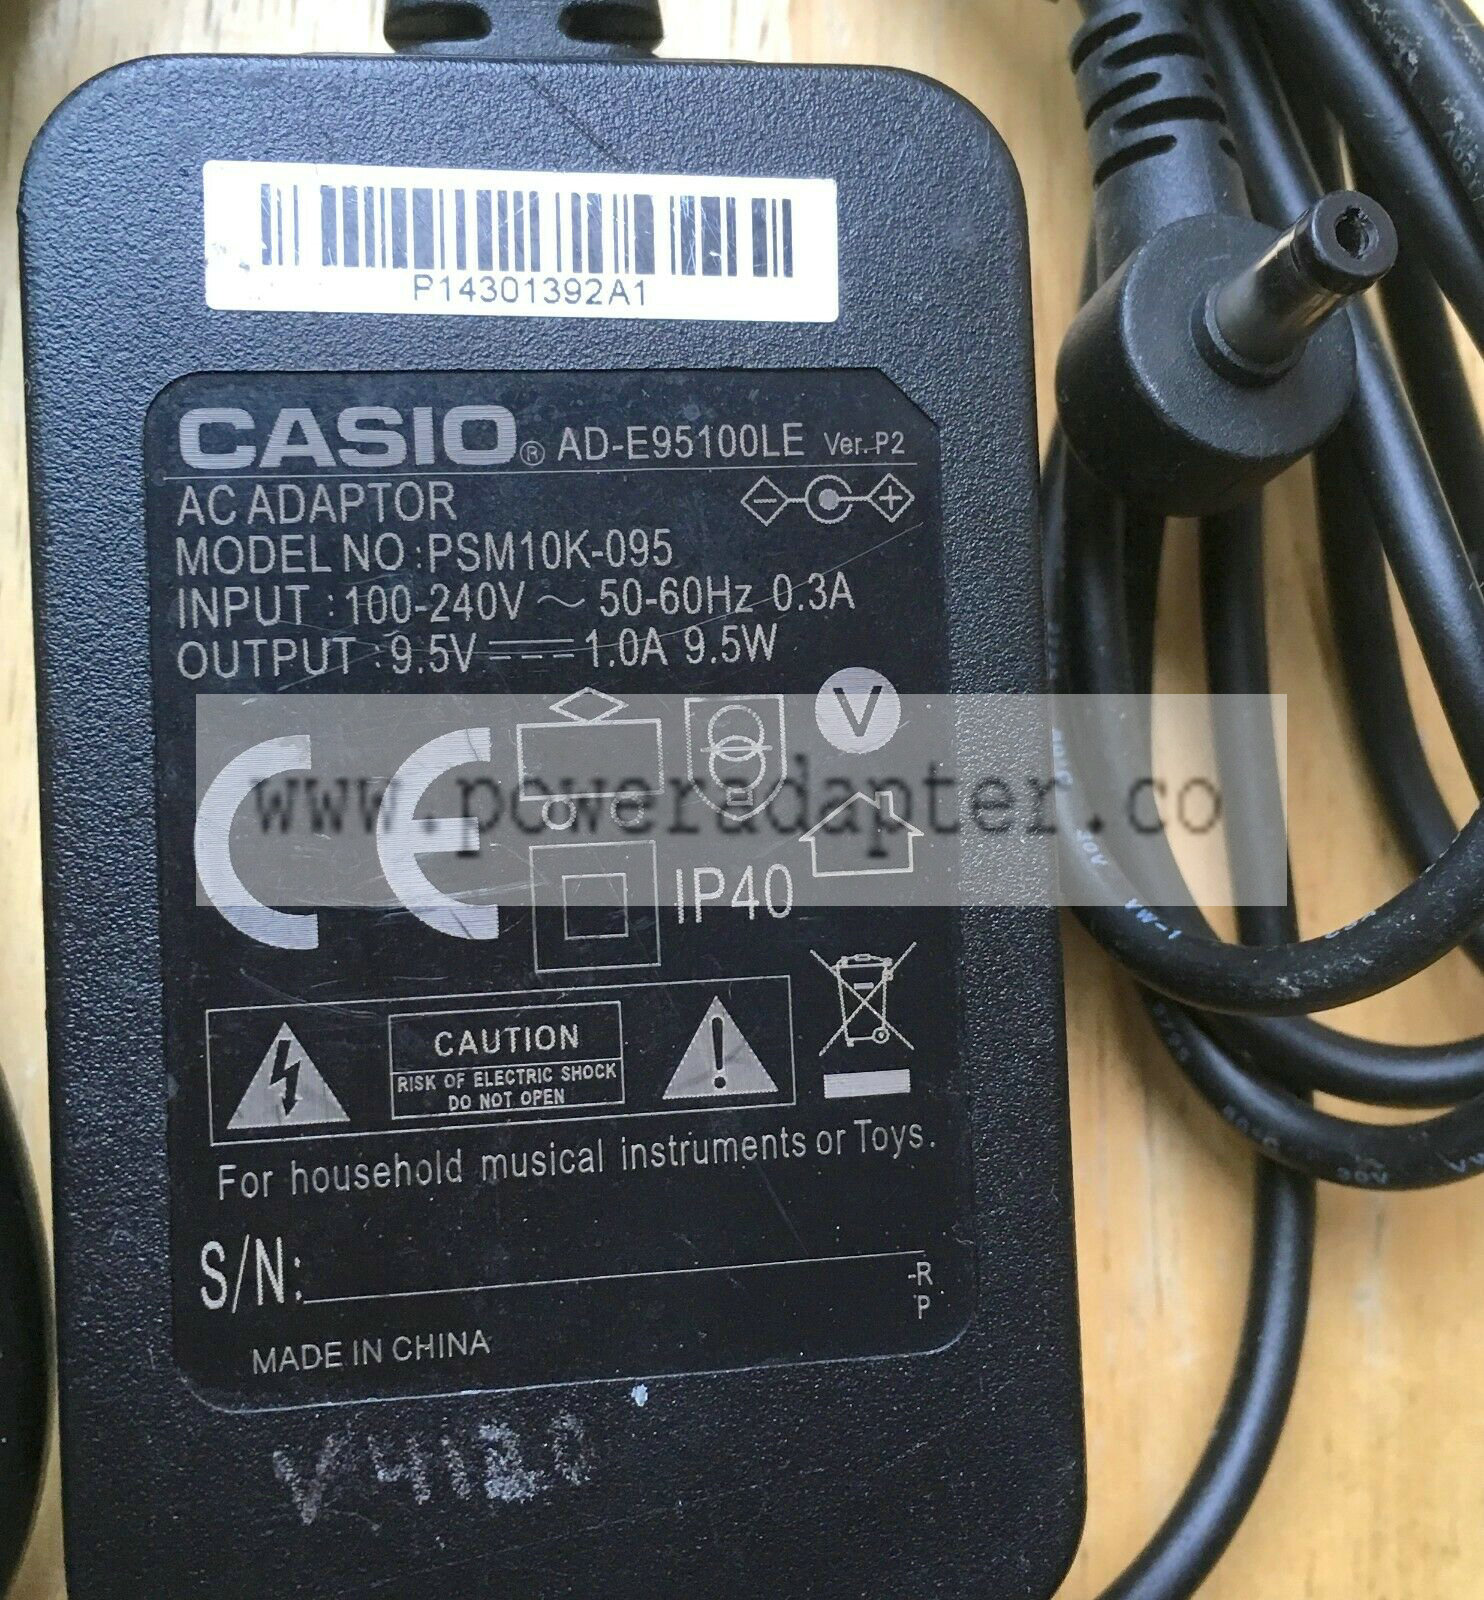 GENUINE CASIO 9.5V KEYBOARD power ADAPTER PLUG MODEL PSM10E-09 AD-E95100LE CASIO 9.5V 1A Genuine Keyboard Power Supp - Click Image to Close